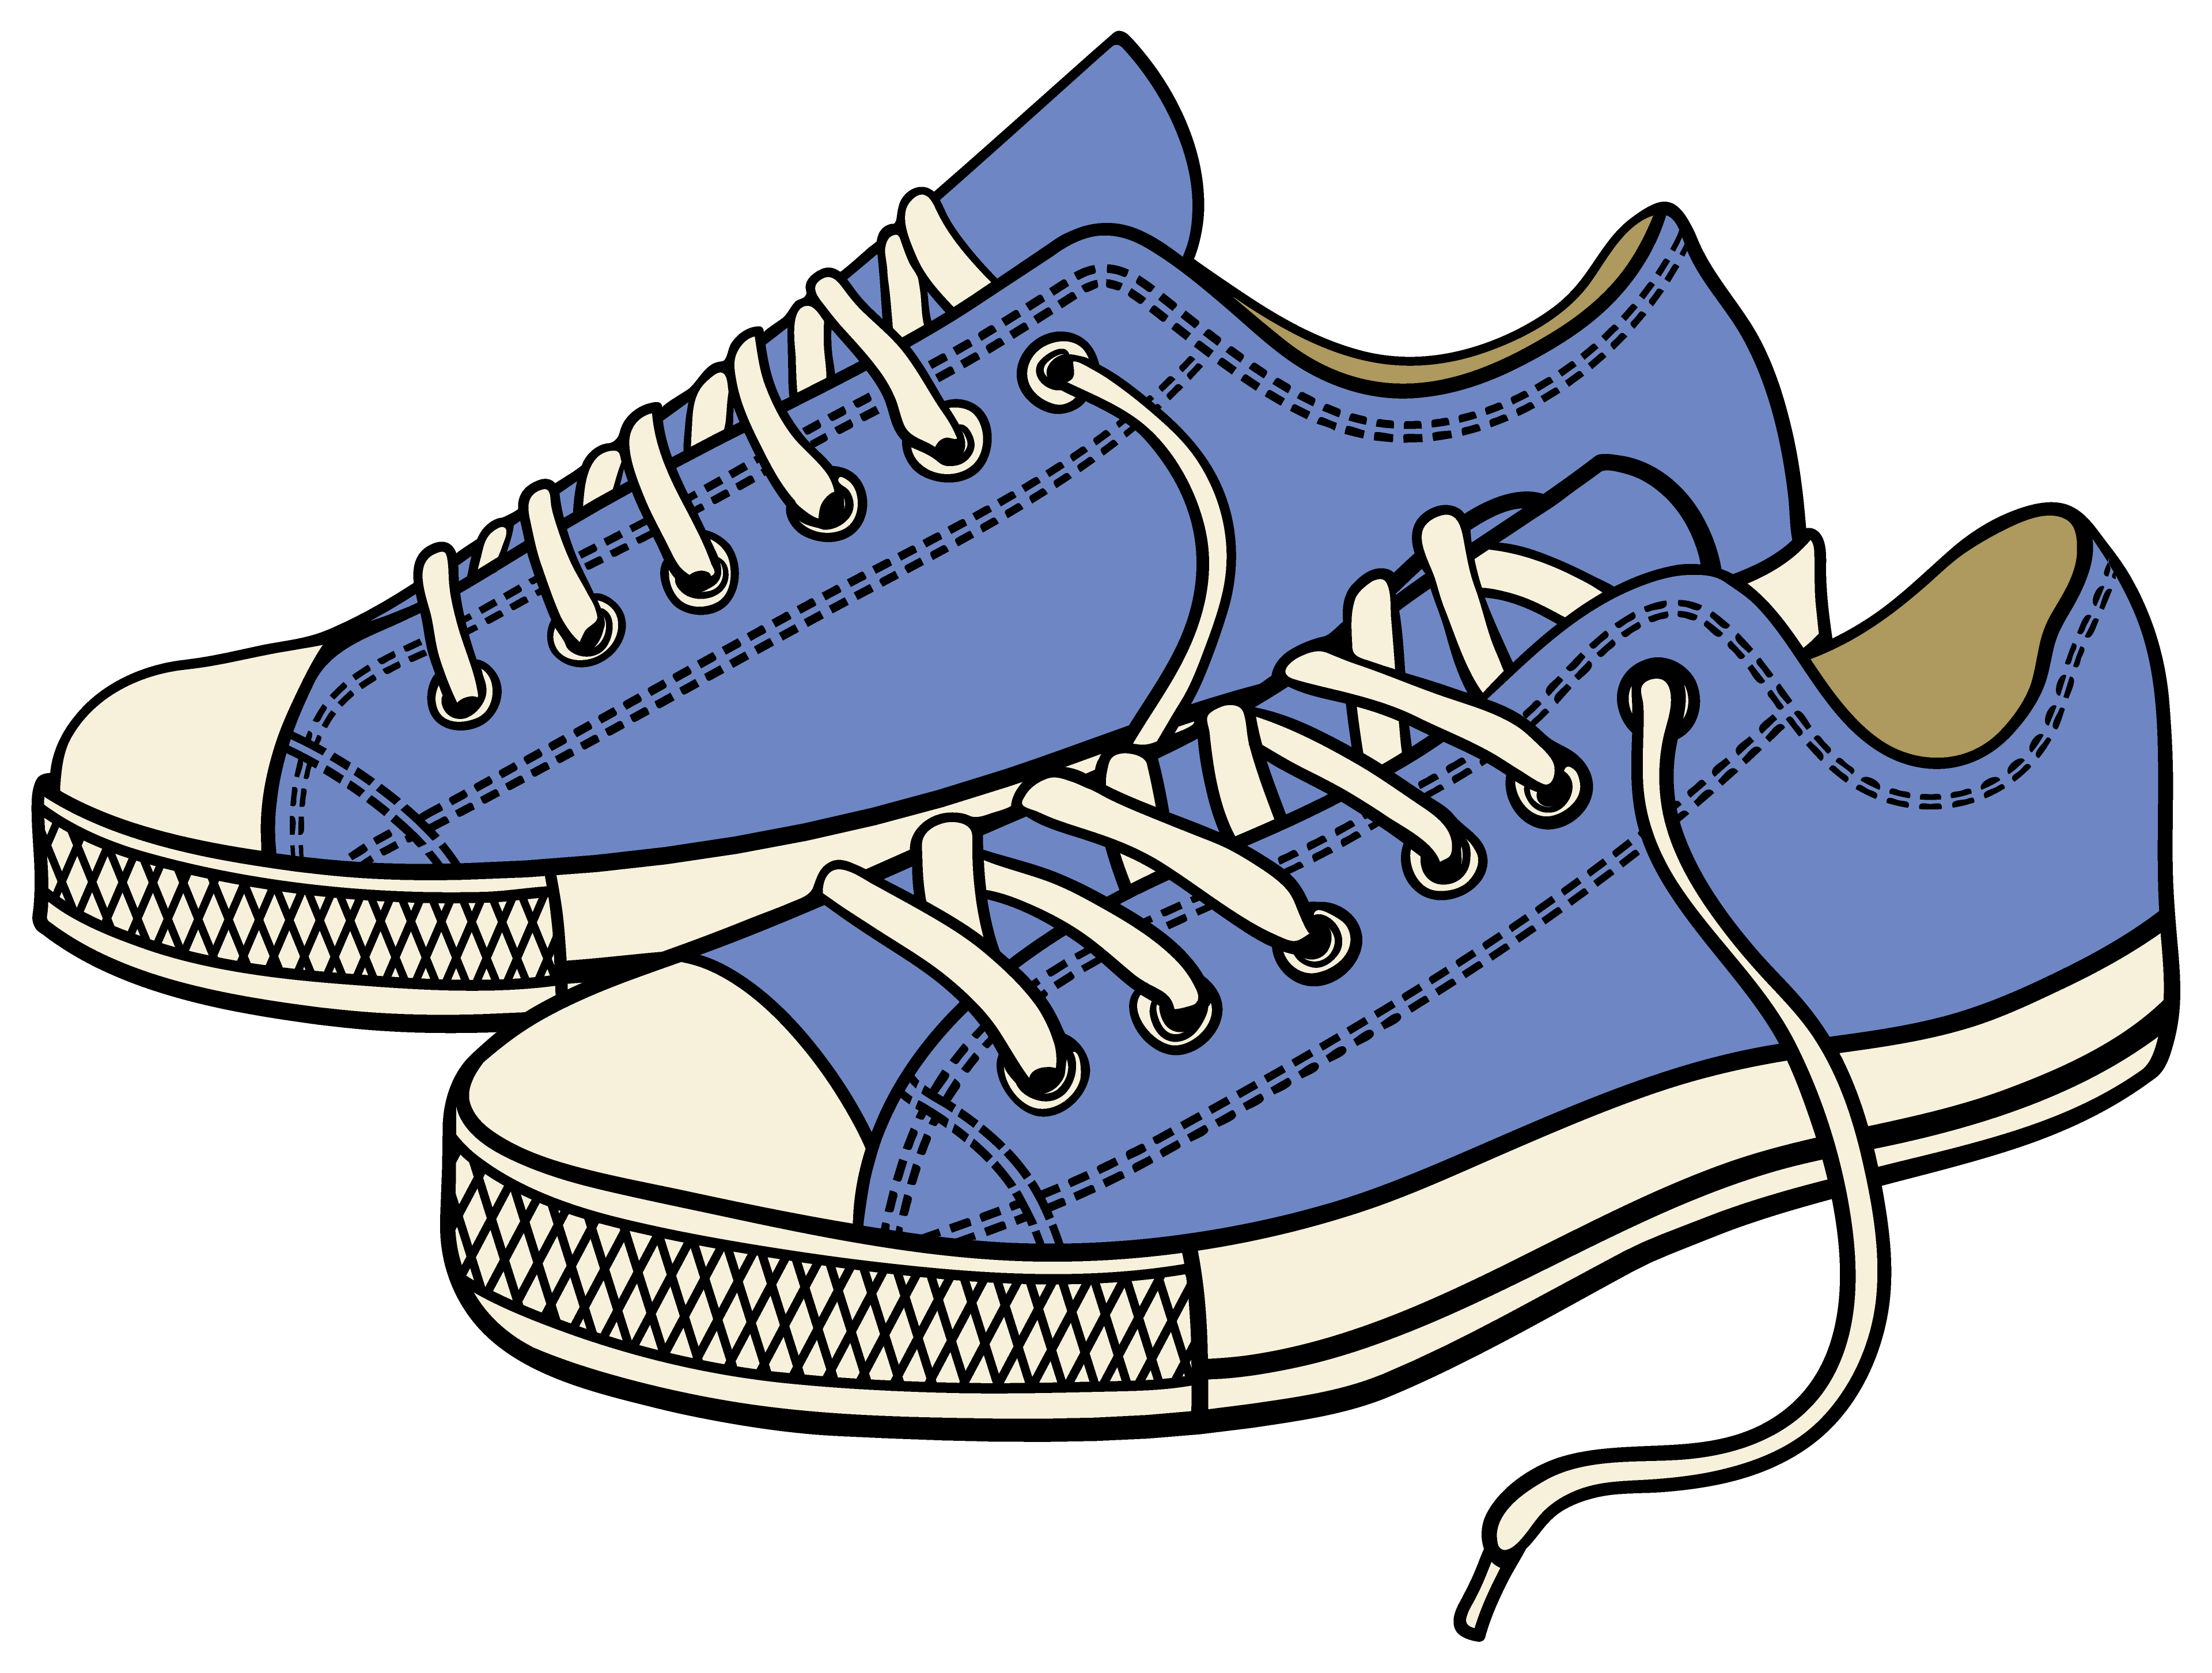 Shoes Cartoon Images / Pair Of Shoes Cartoon Icon Vector Stock Vector